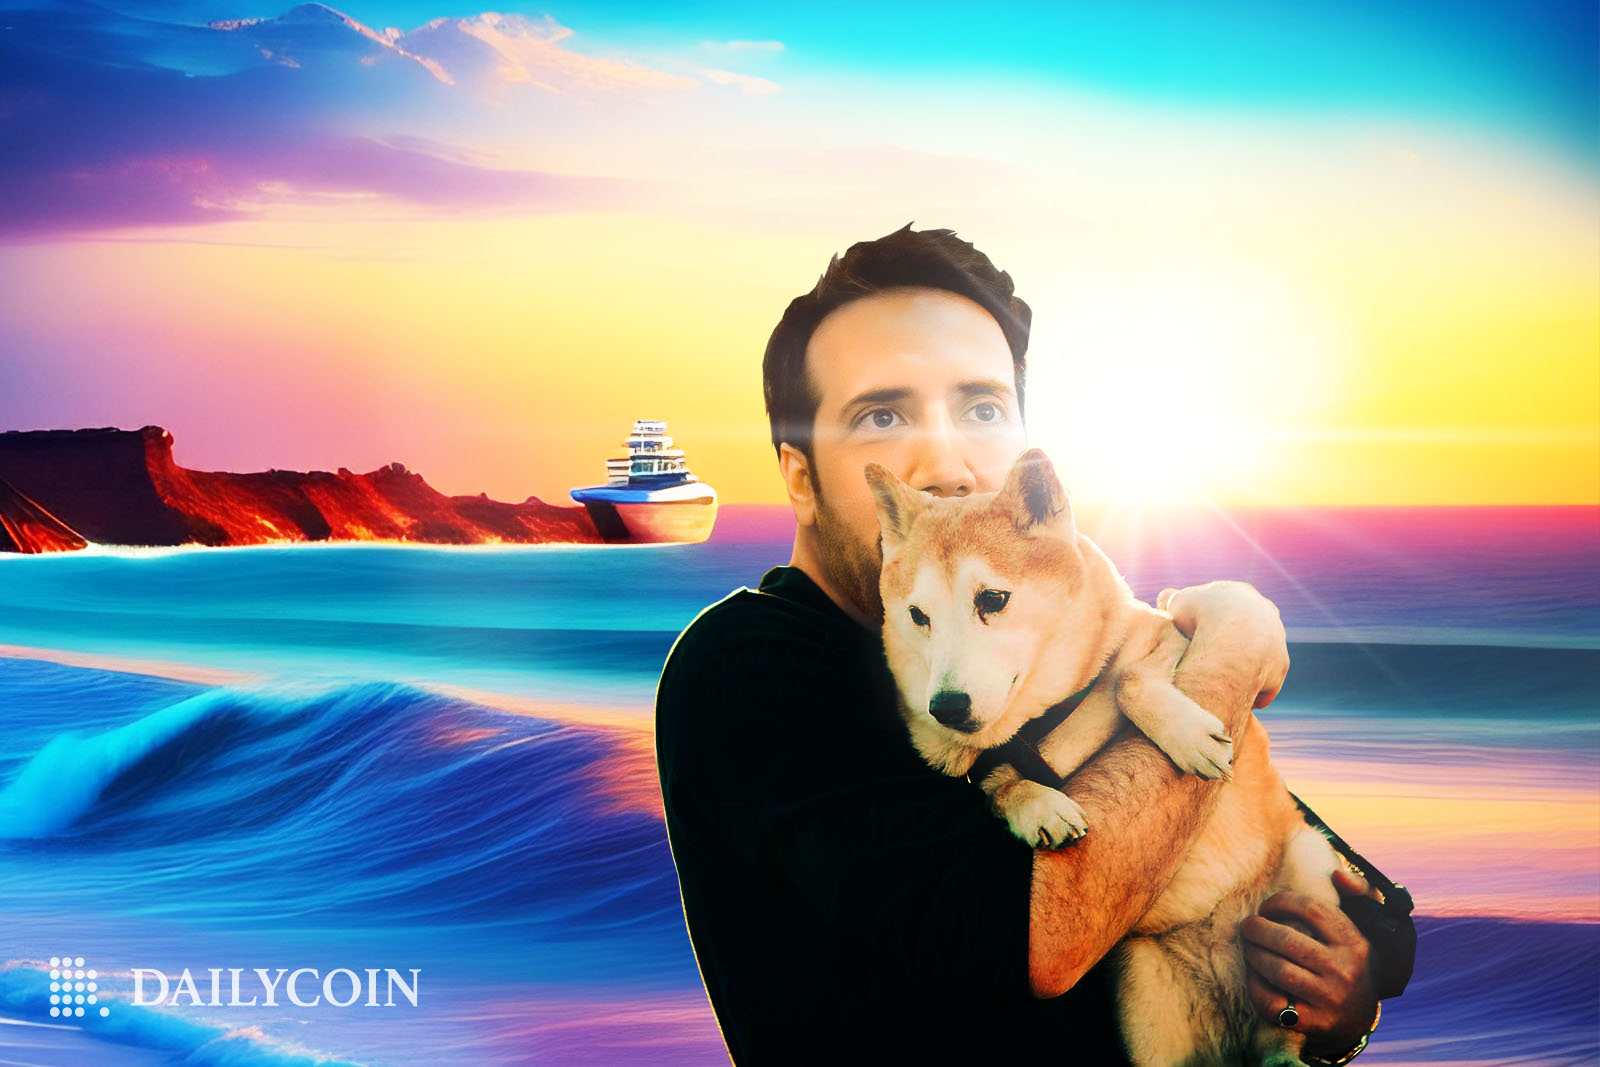 David Gokhshtein holding a Shiba Inu dog at the beach waiting for the sunset surrounded by colorful clouds and contemplating.